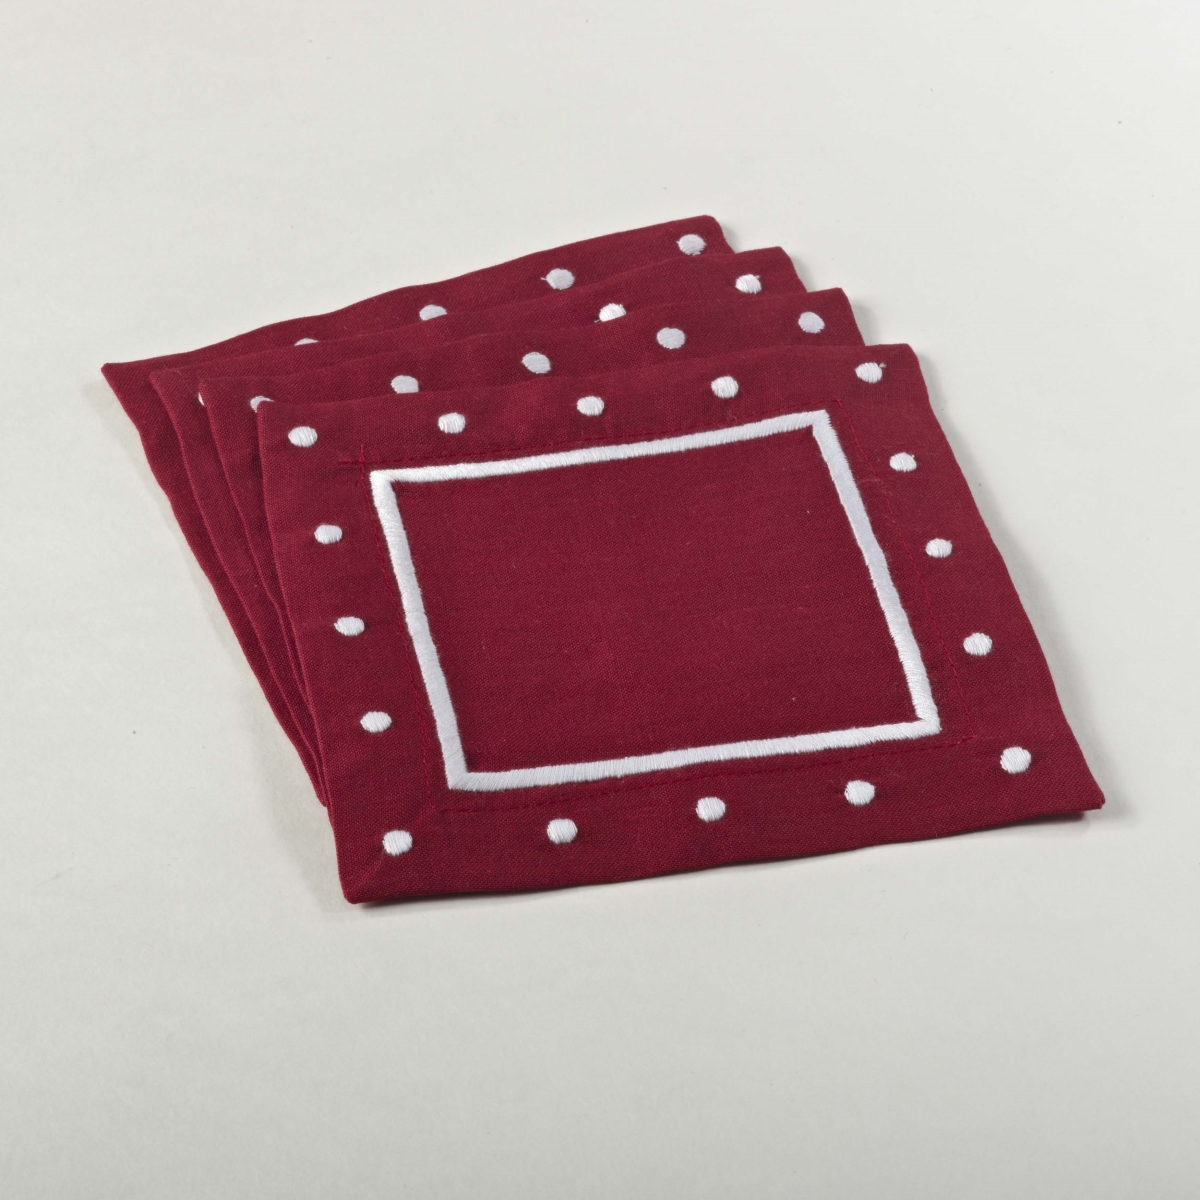 0551.r6s 6 In. Angelina Napkins Red Square Coaster, Red - Set Of 4